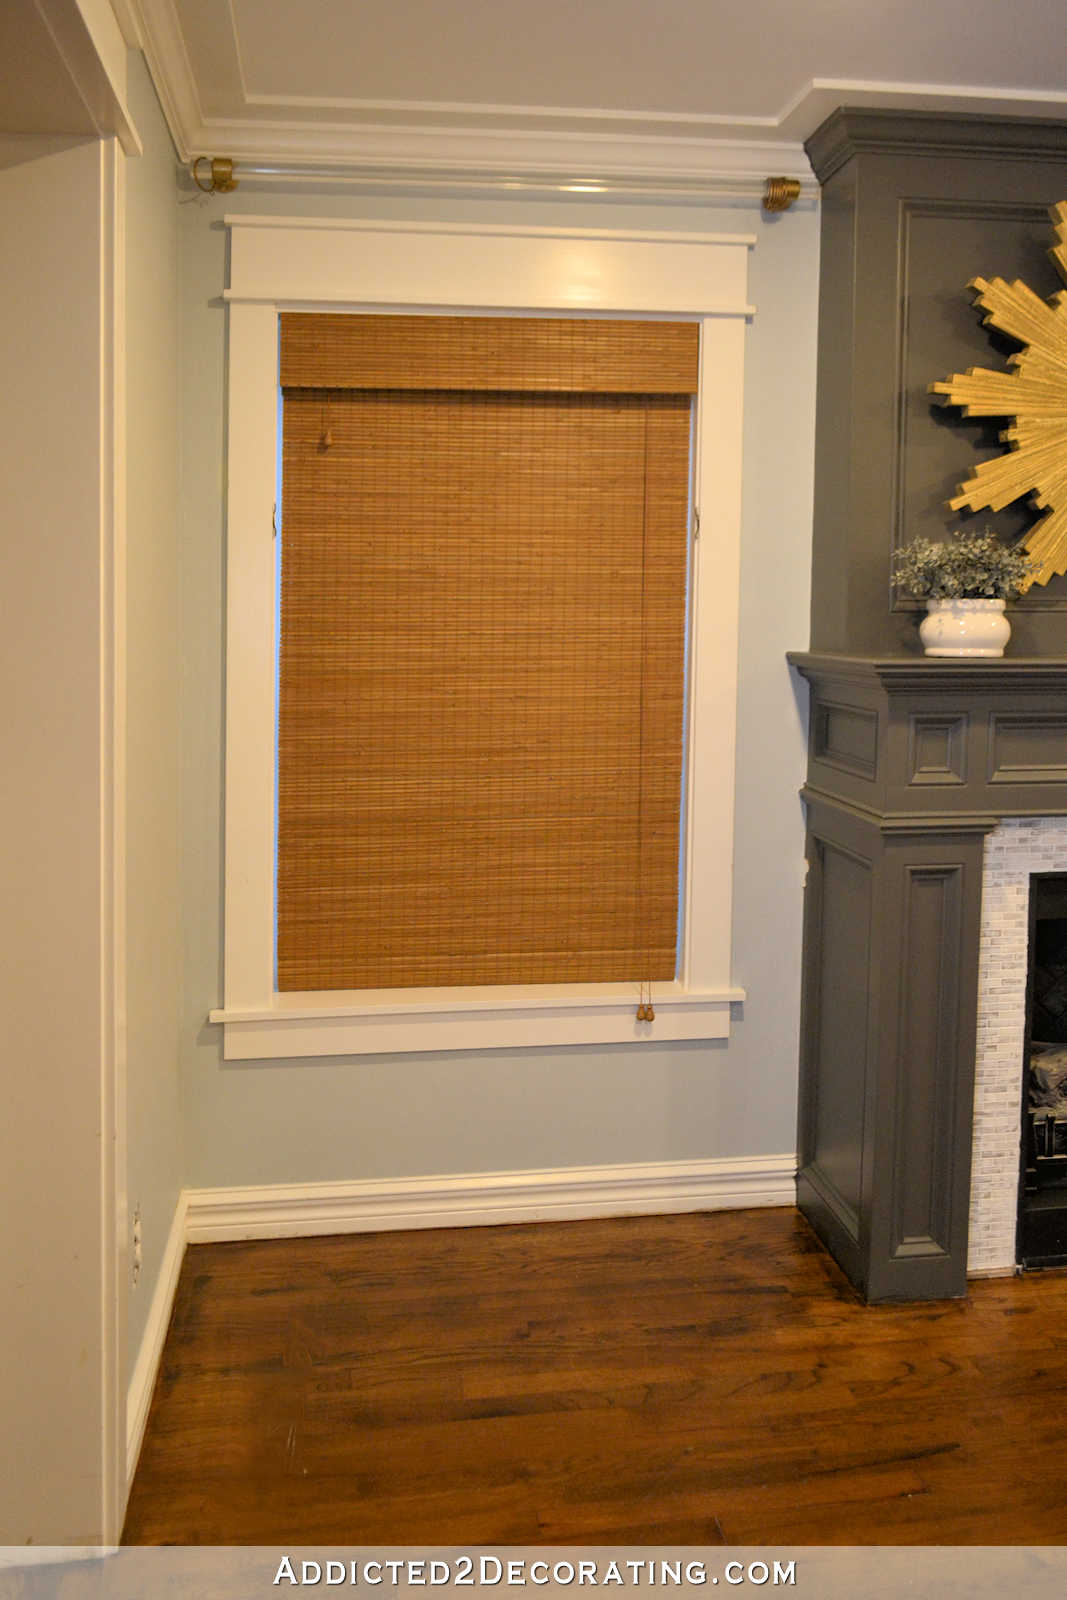 new woven shades from Blindsgalore - living room - window to left of fireplace - shade closed